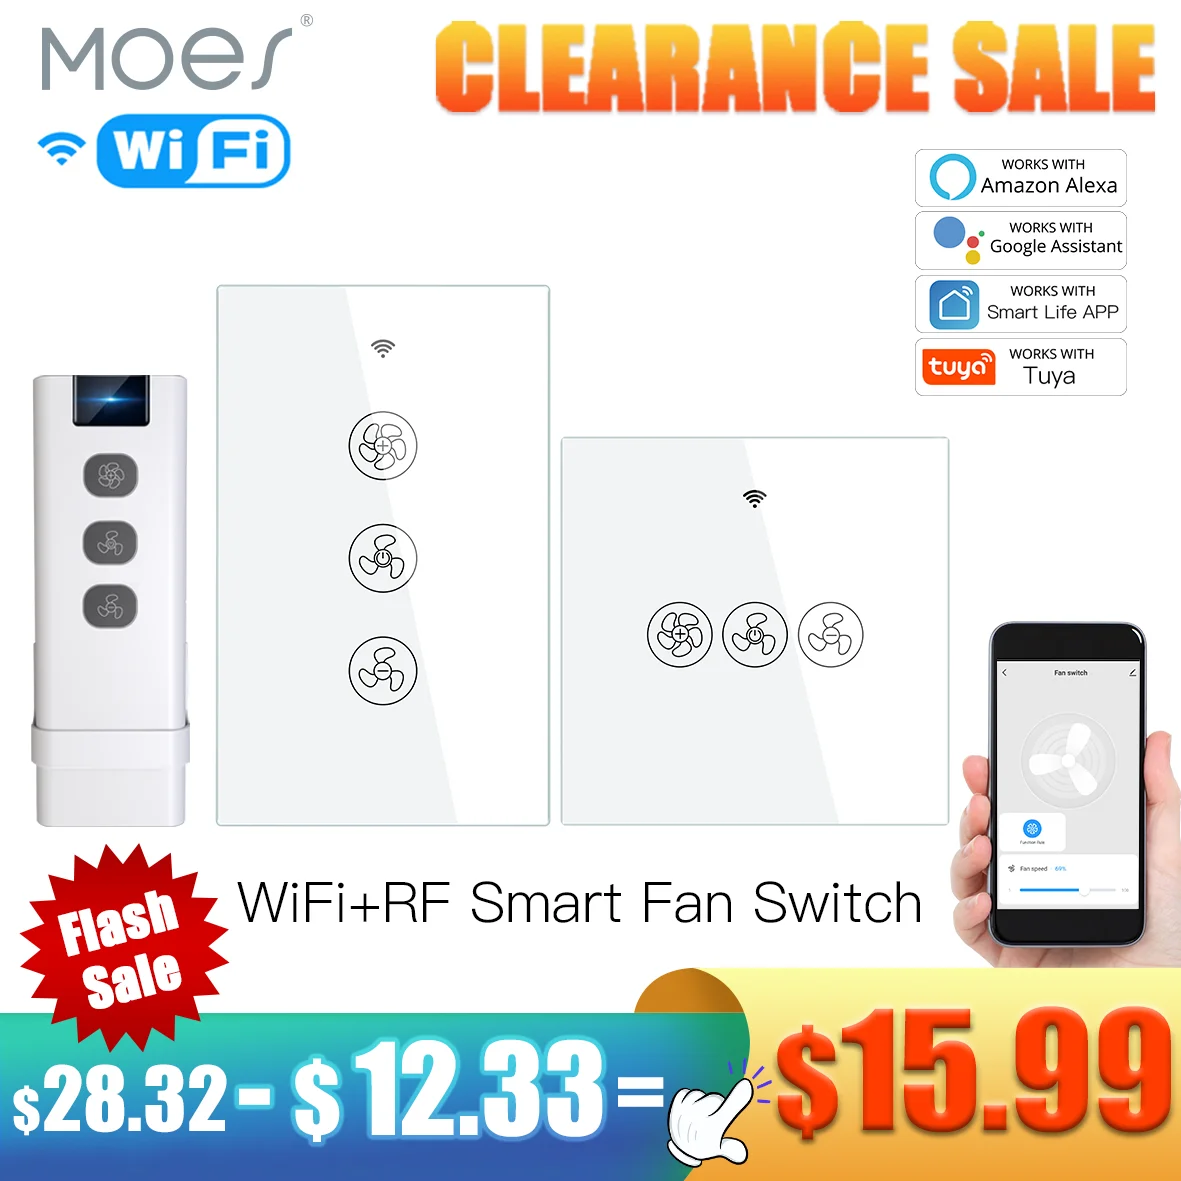 MOES WiFi RF433 Smart Ceiling Fan Switch Smart Life/Tuya App control Wireless Remote Control Works with Alexa and Google